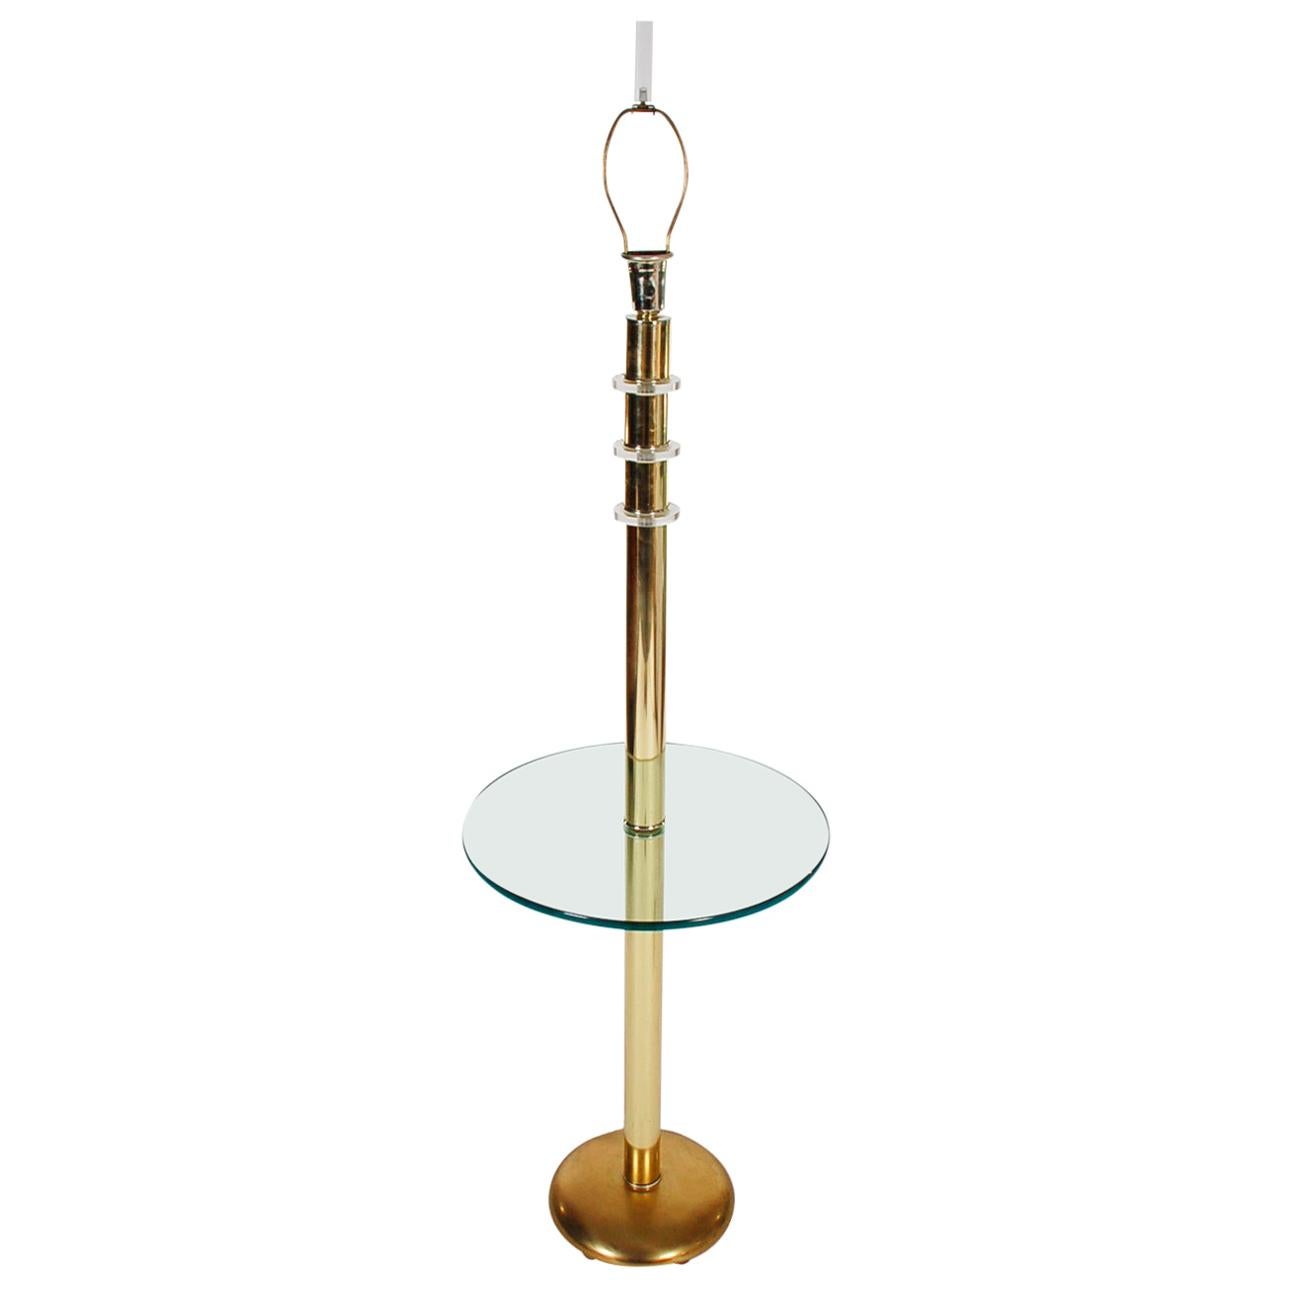 Midcentury Italian Modern Brass and Lucite Side Table / Floor Lamp Combination For Sale